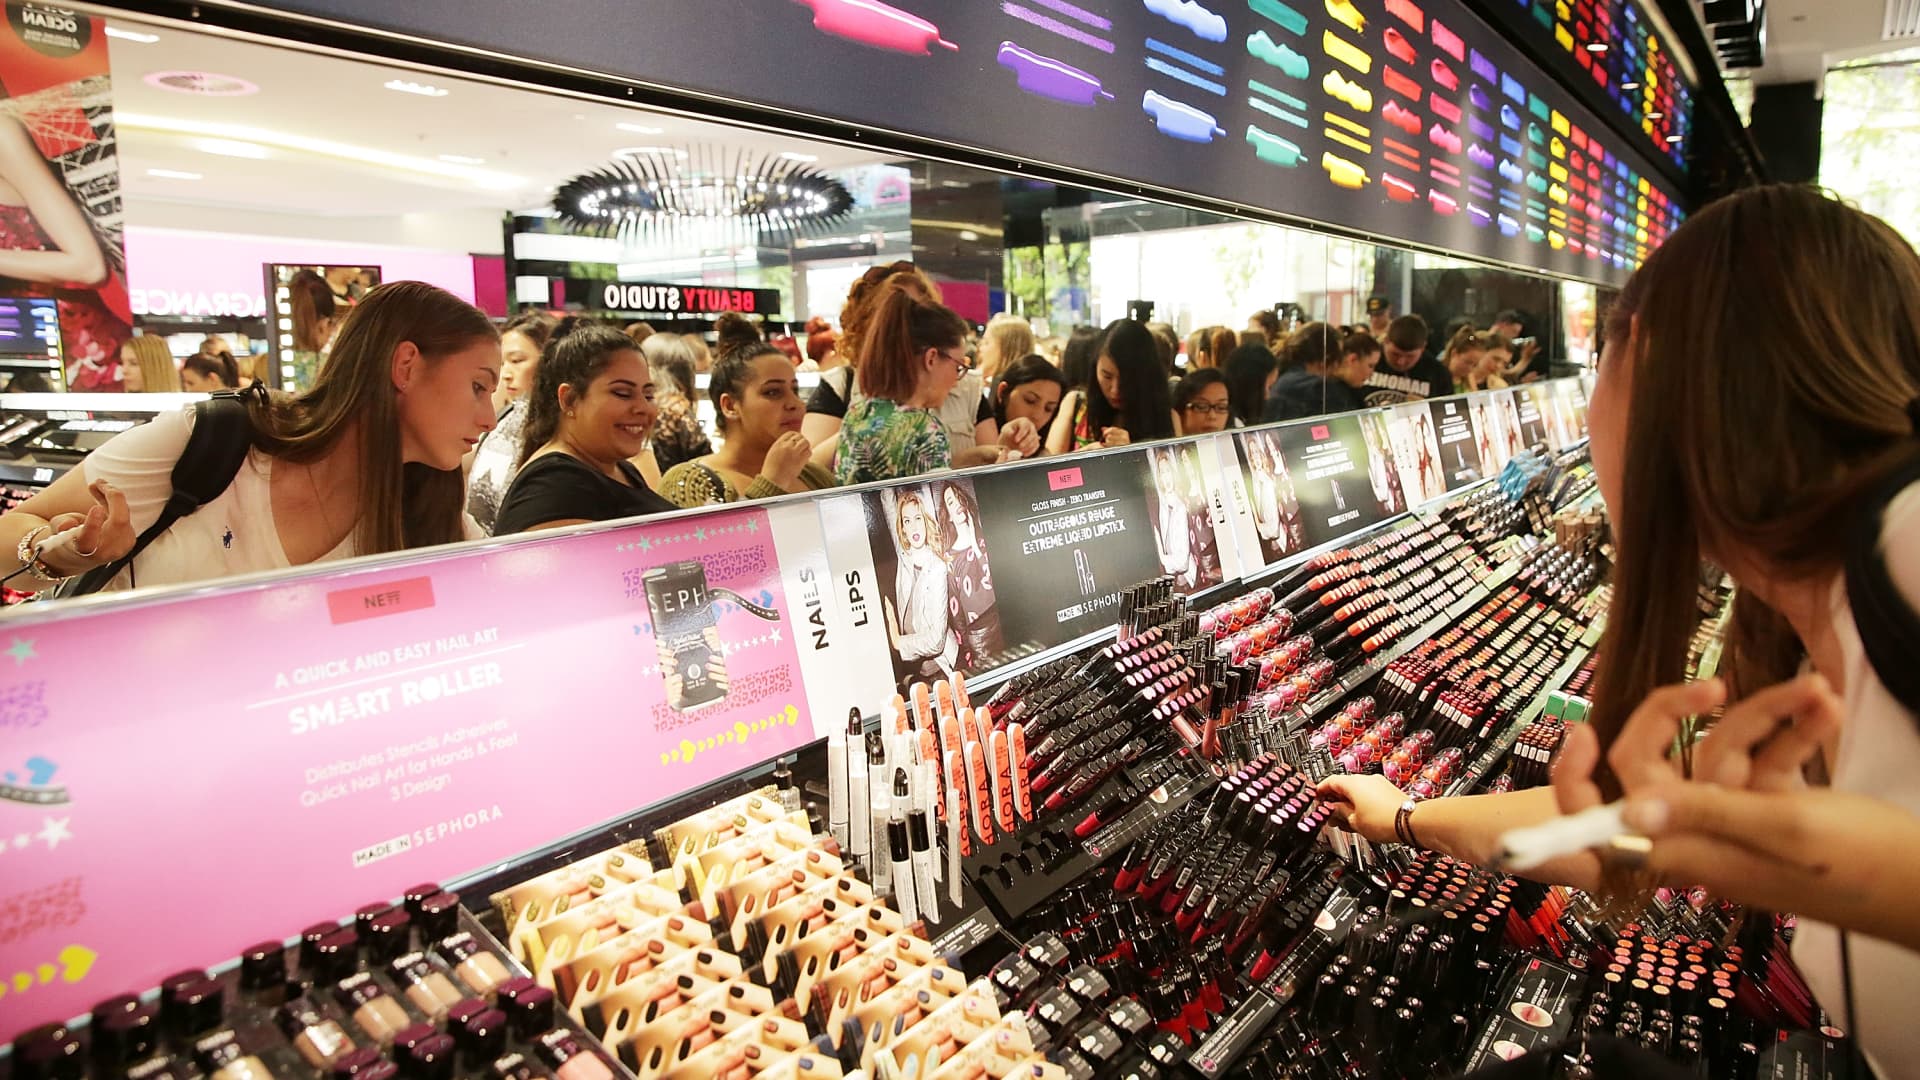 Customers shop for makeup at a Sephora store.